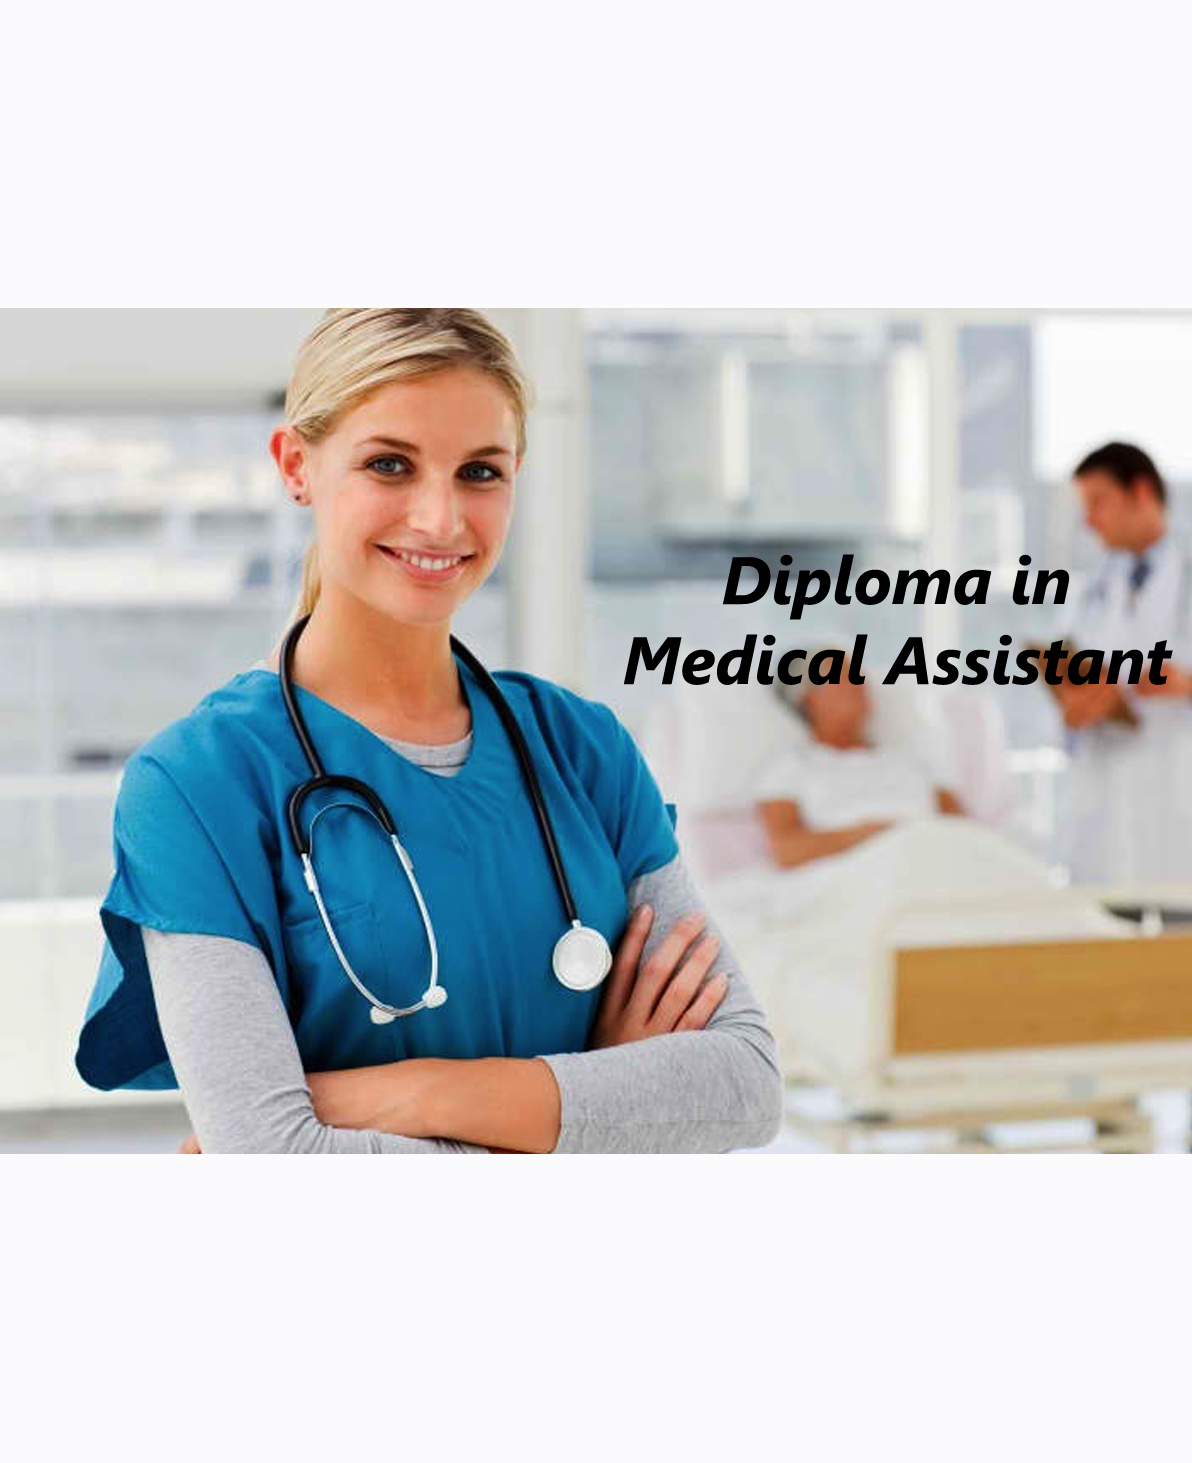 Diploma in Medical Assistant